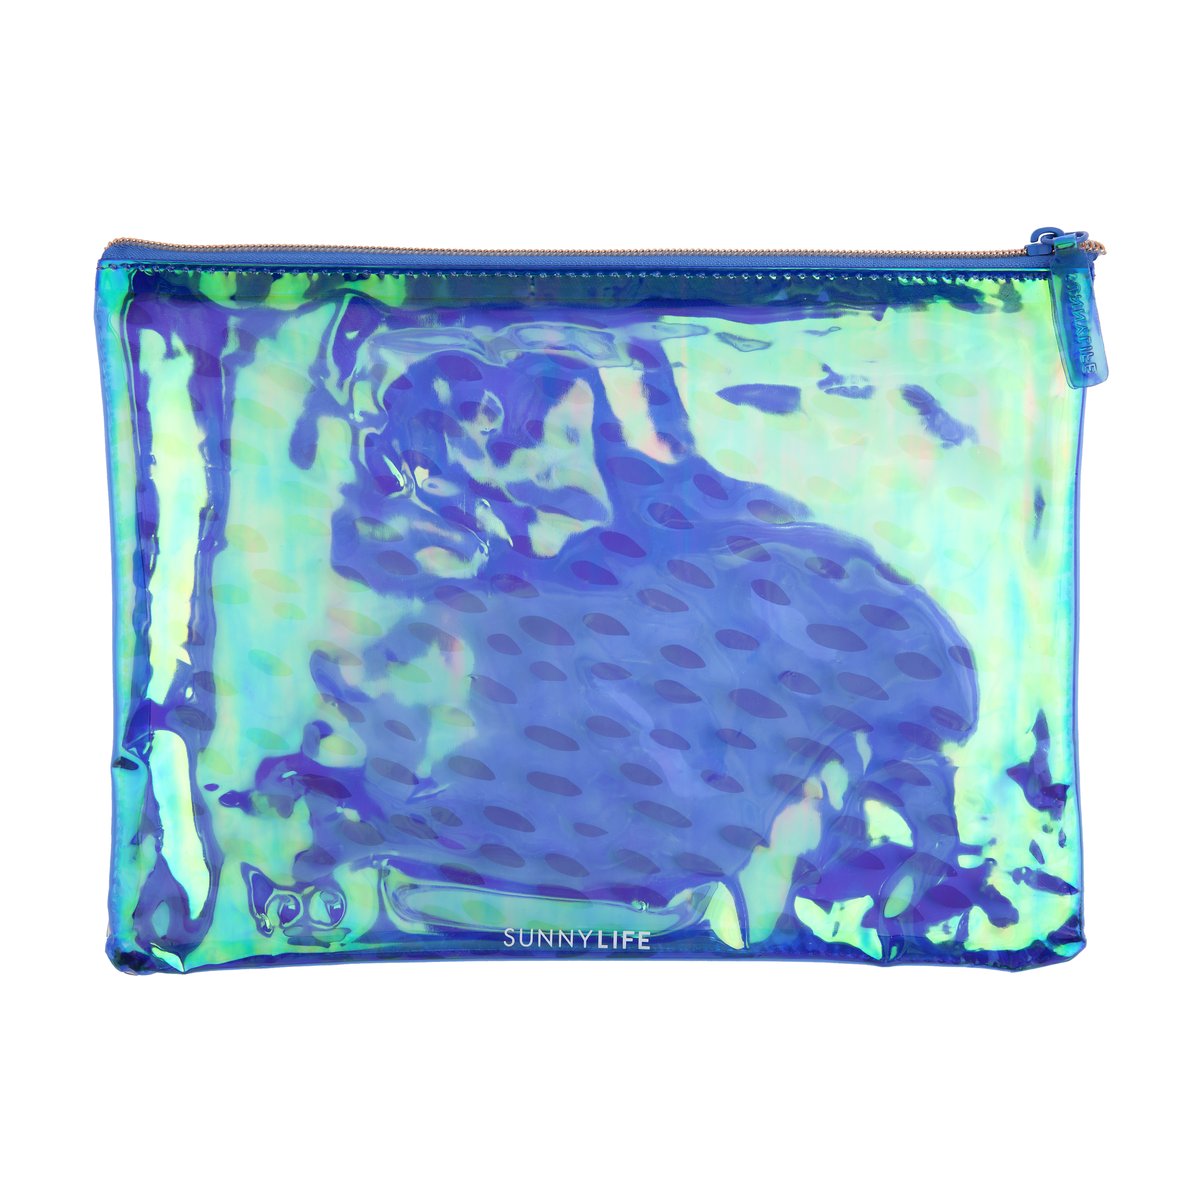 SunnyLife - See Thru Pouch Electric Bloom Blue | Peter's of Kensington